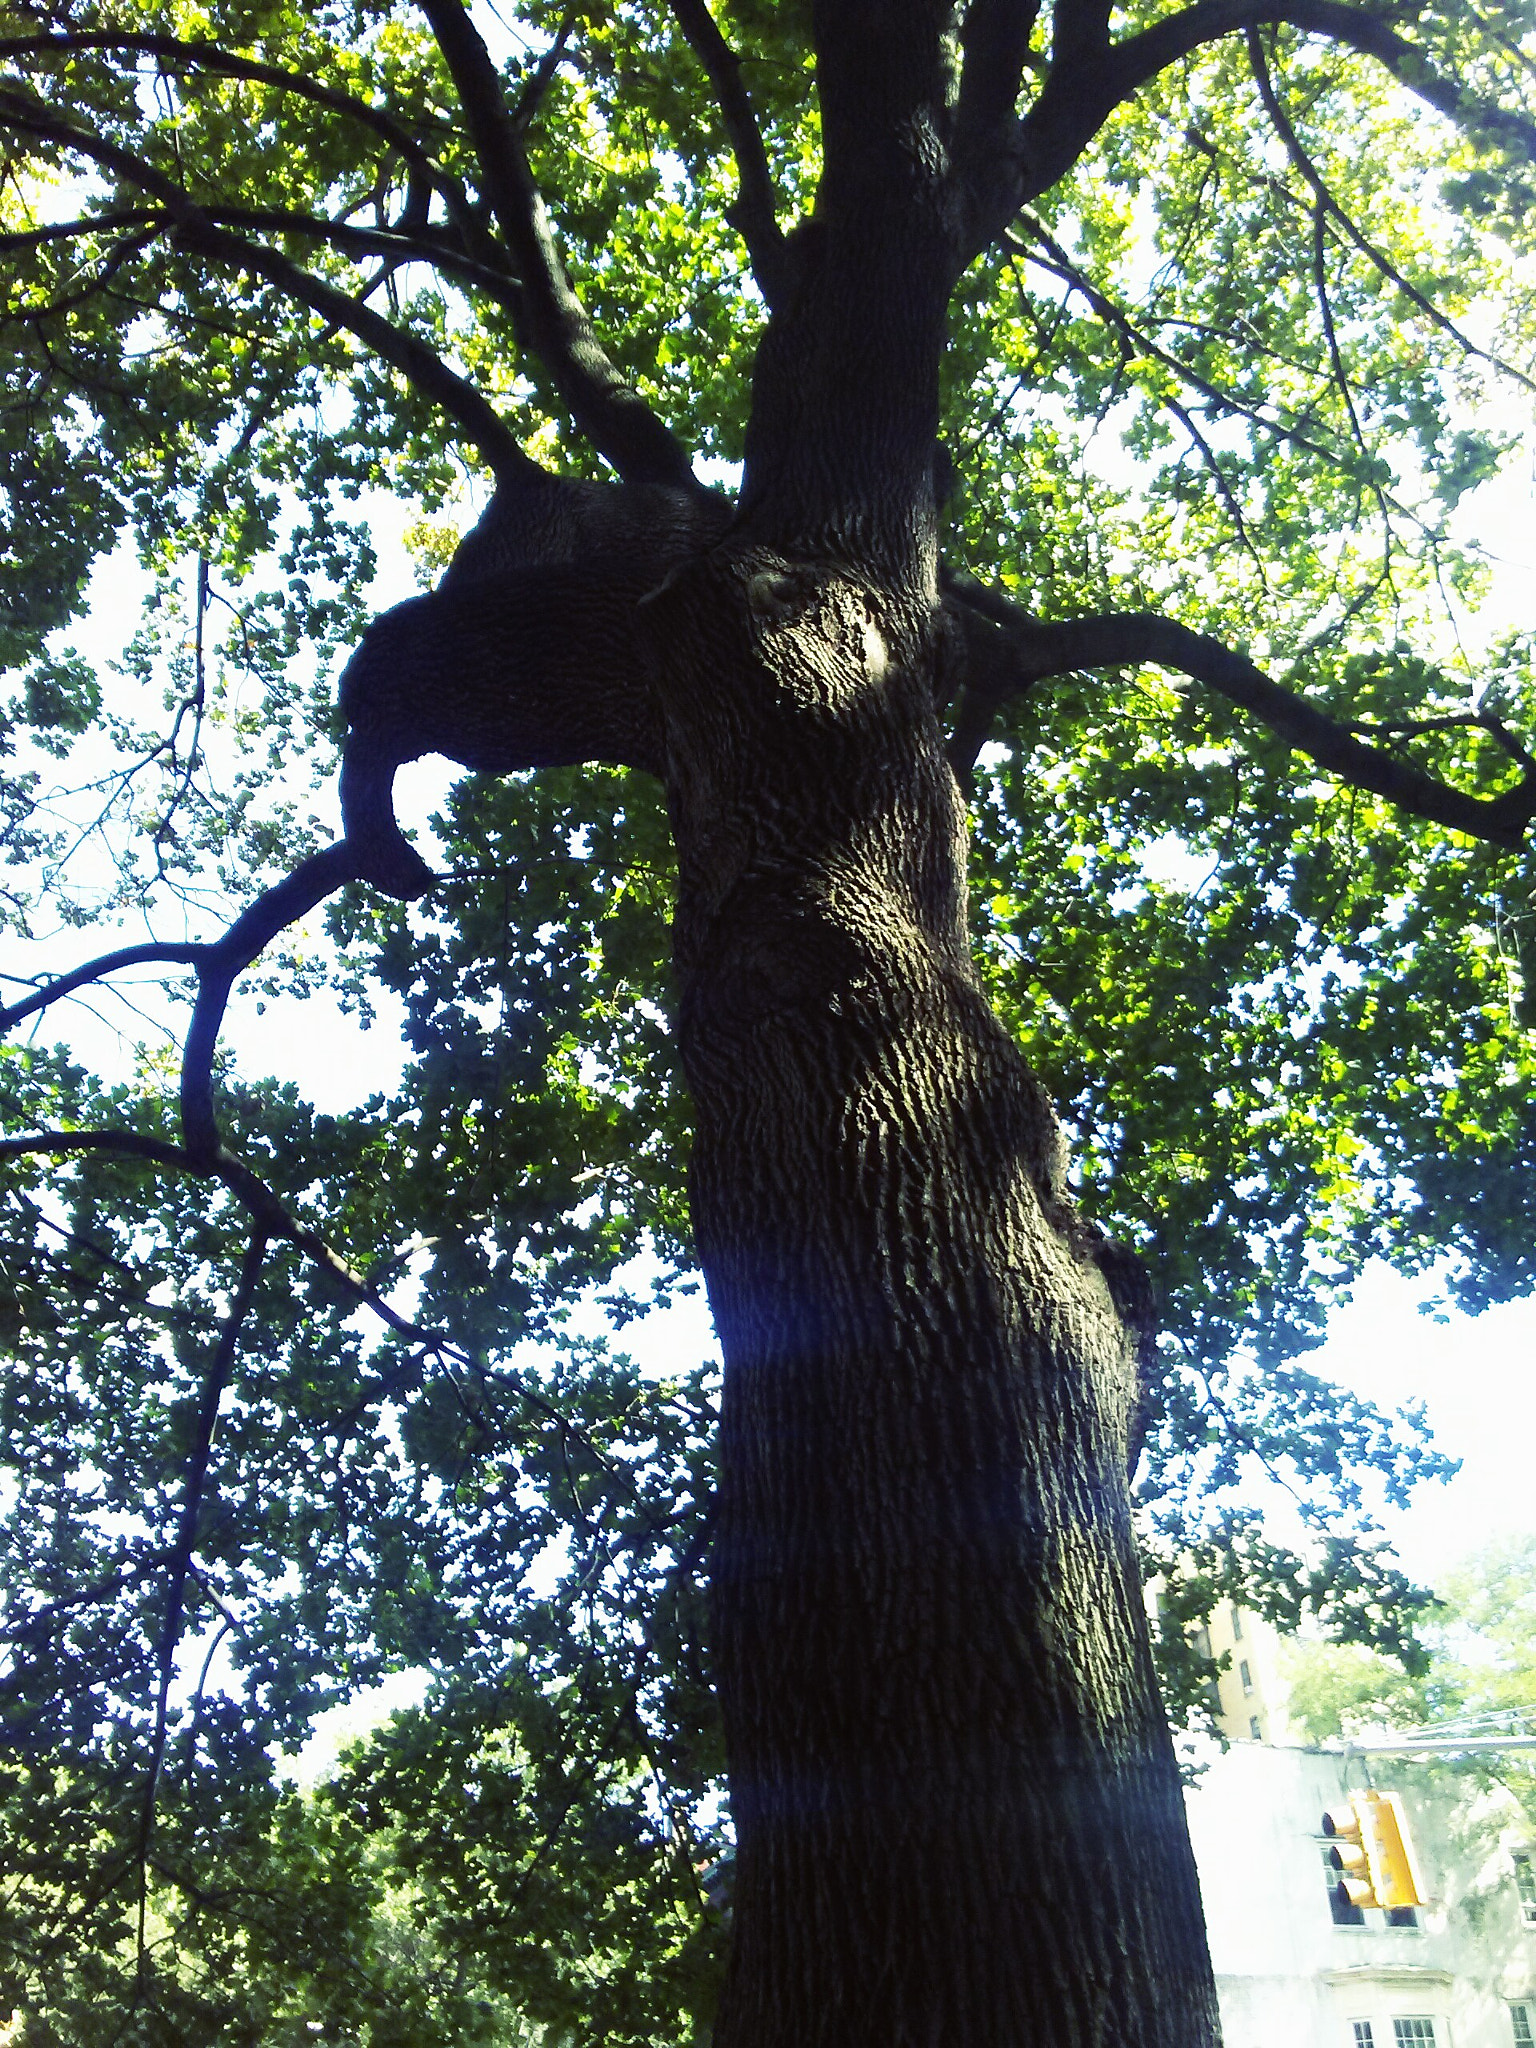 LG M1 sample photo. Riverside park tree. the symbol of strength and life photography